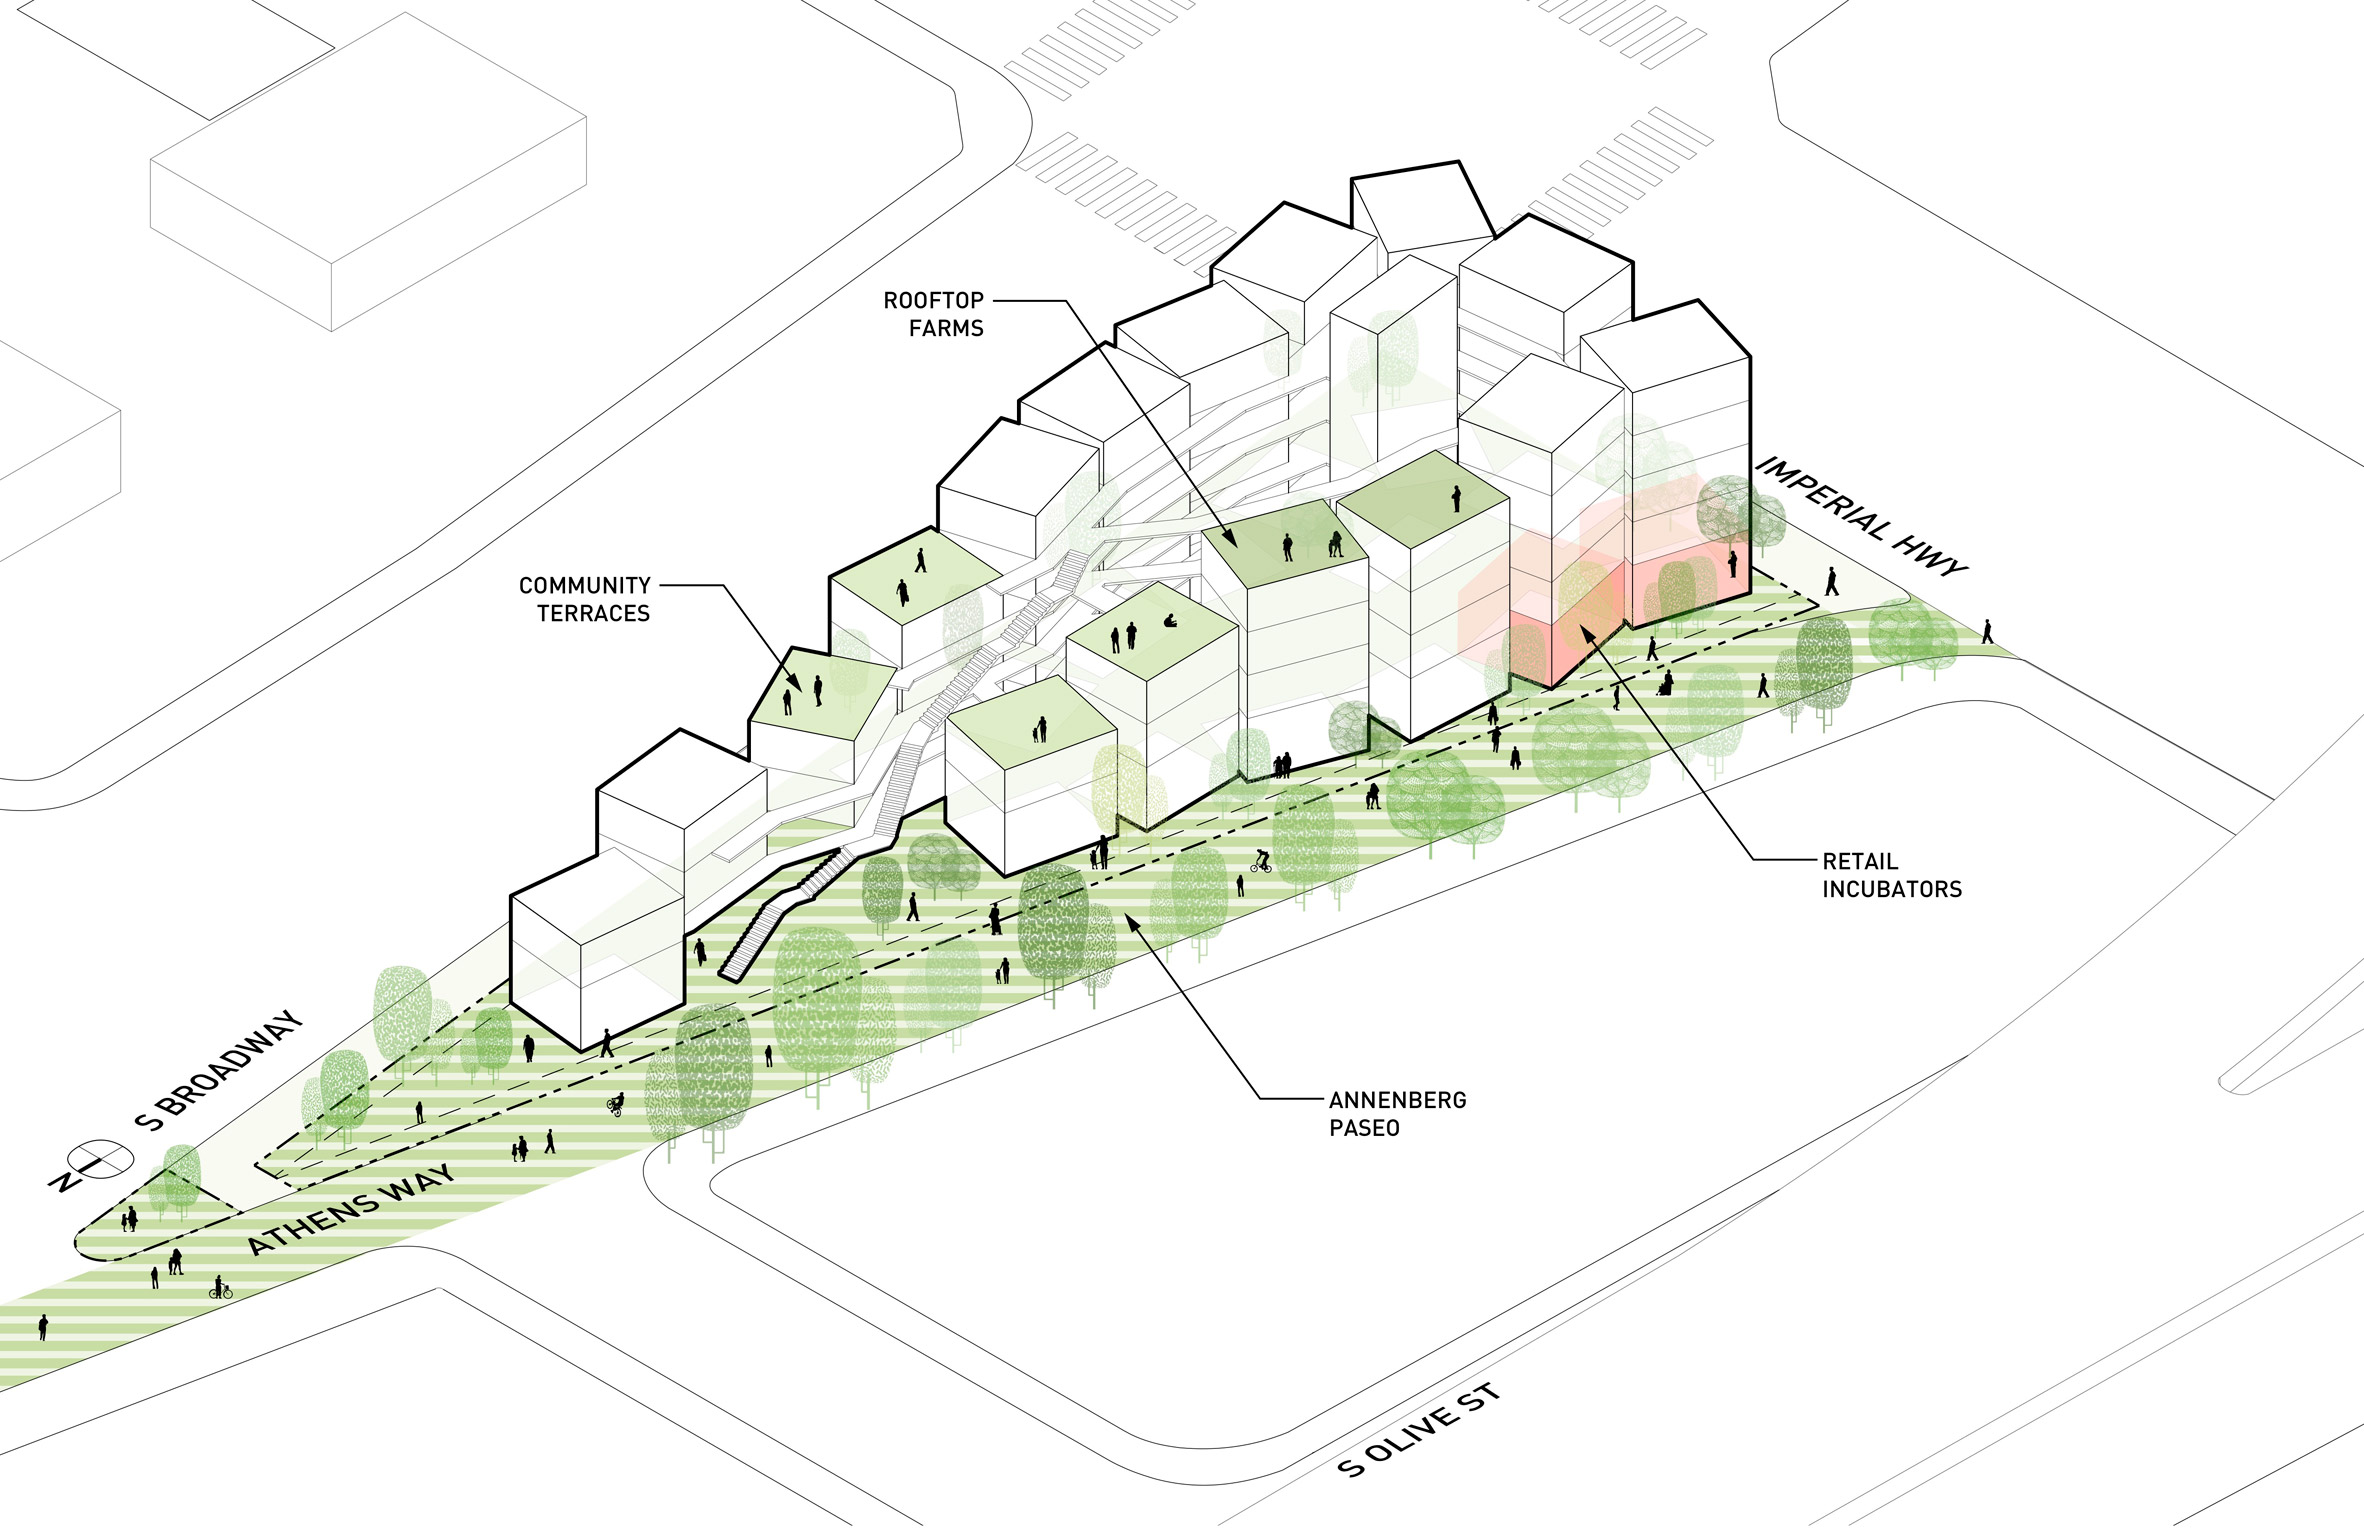 This is an architectural, schematic drawing that shows a wedge of land bounded by Imperial Highway, Athens Way, and South Broadway, and labels different parts of the property as "Retail Incubators," "Annenberg Paseo," "Community Terraces," and "Rooftop Farms."